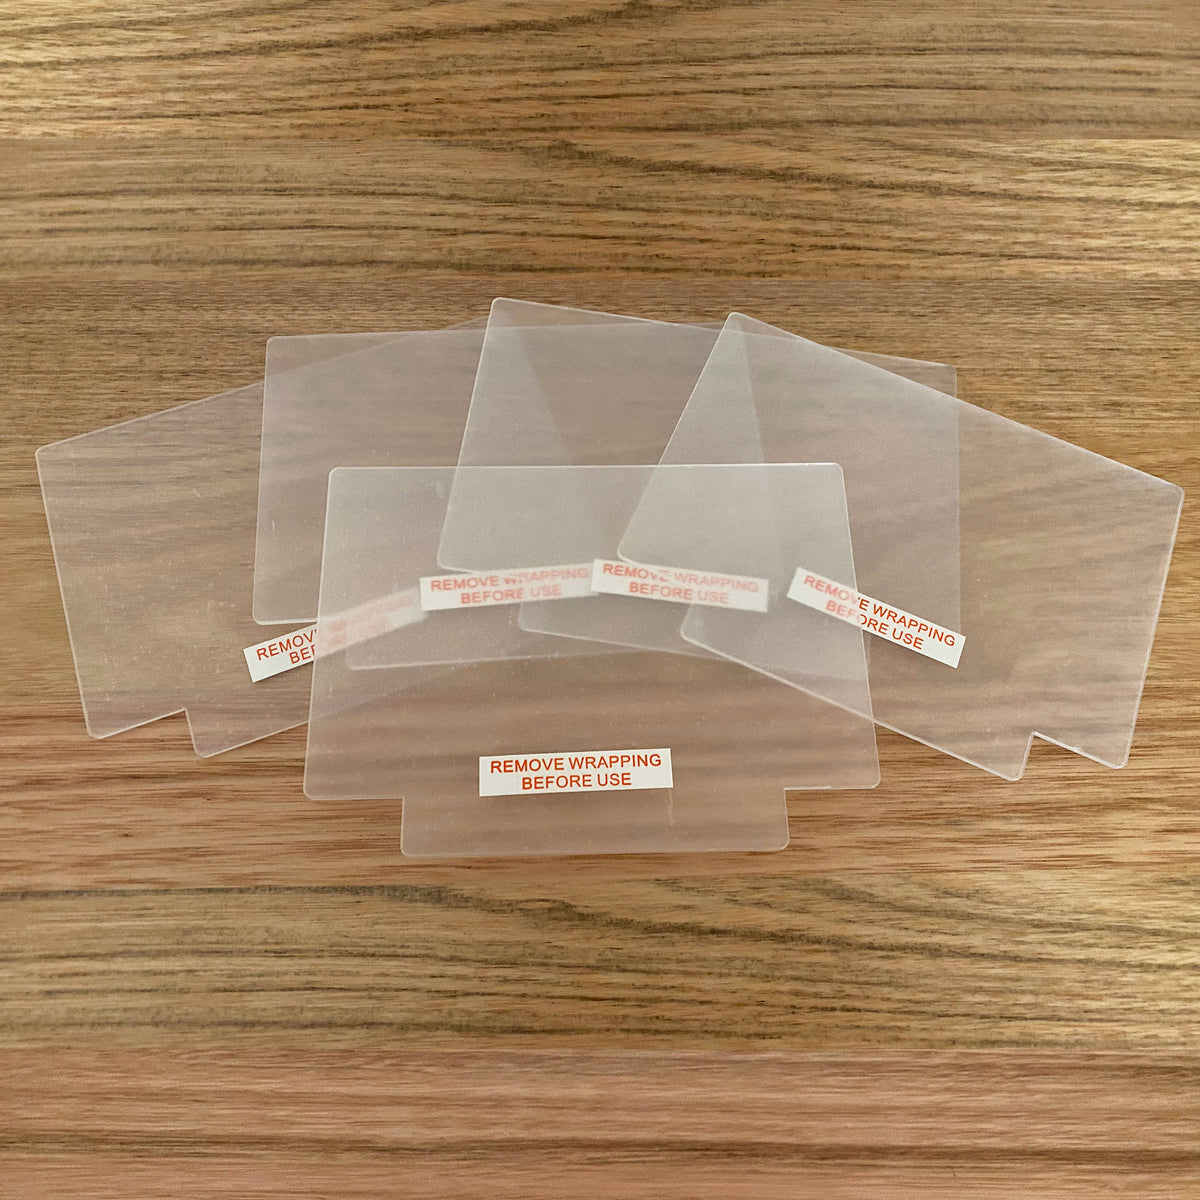 Extra Rectangle Acrylic Pieces (for oval wood base)